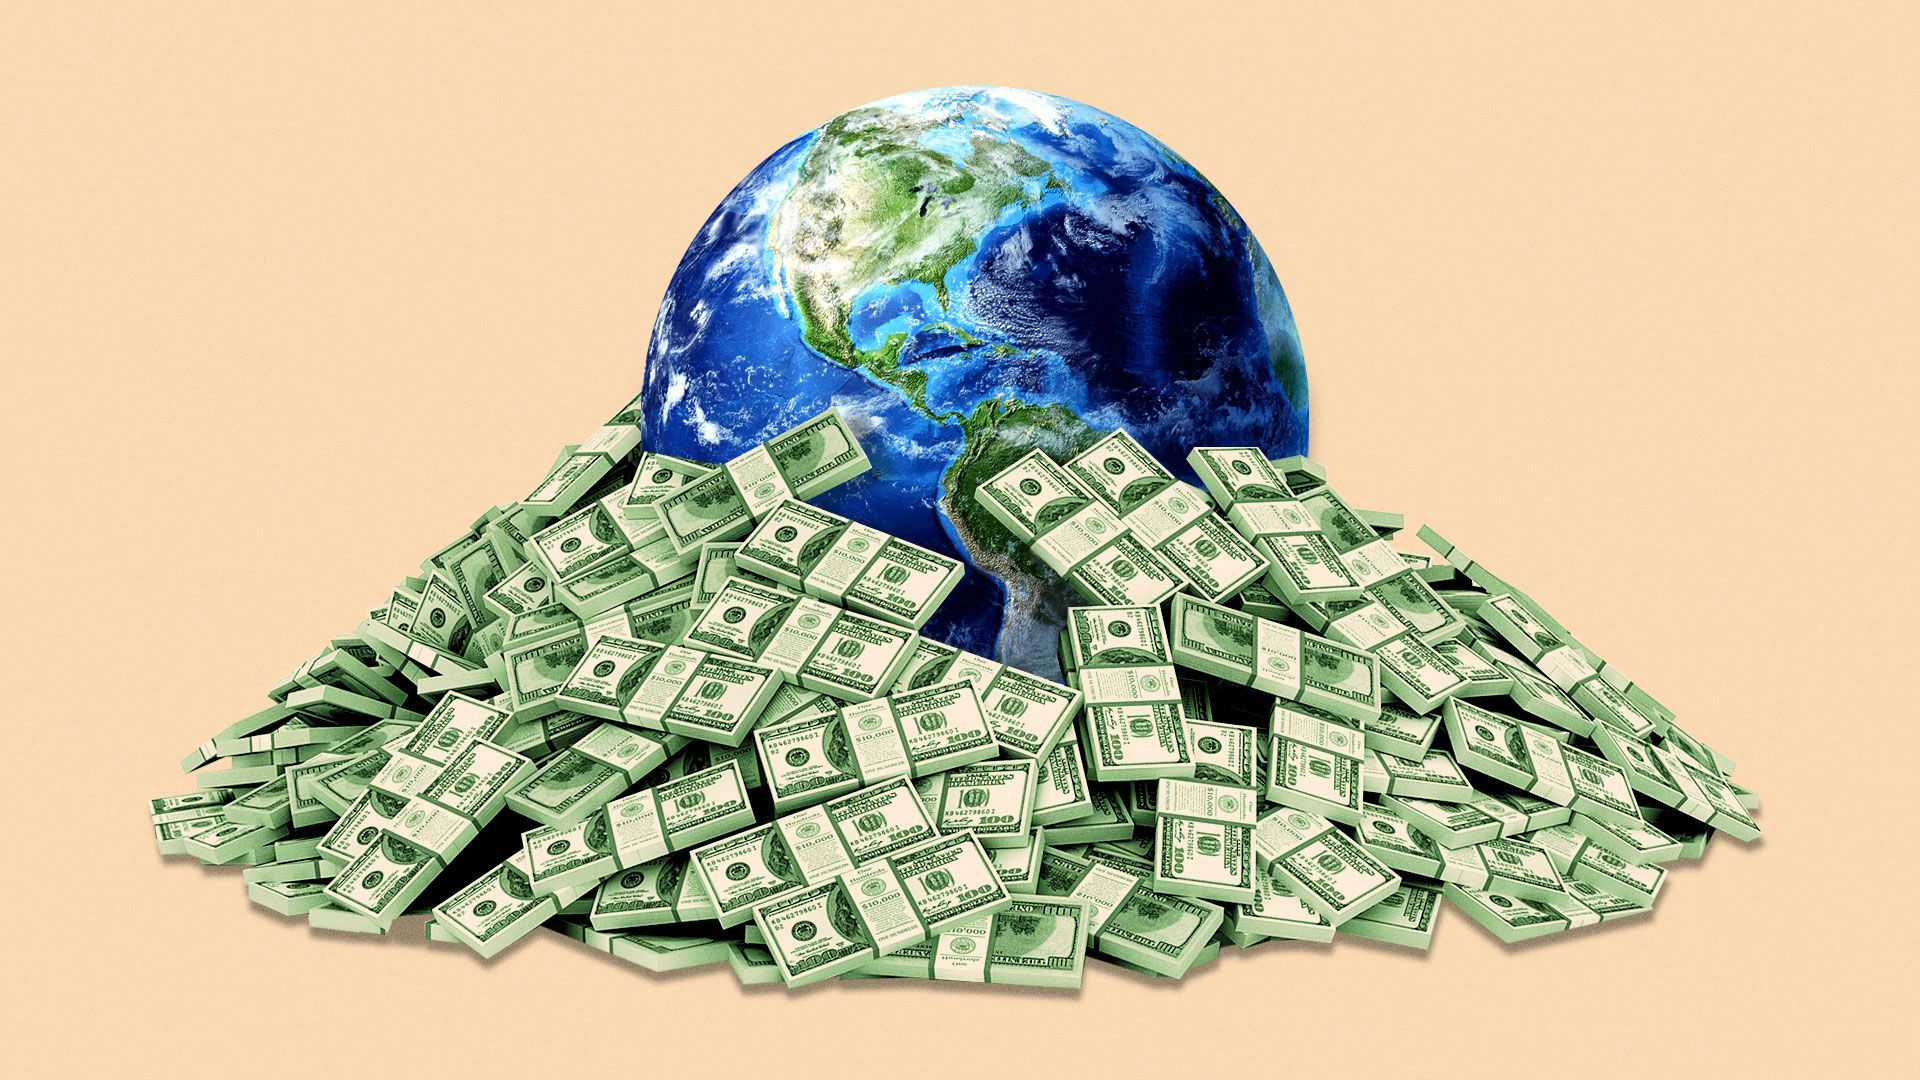 Illustration of the earth on a large pile of money.